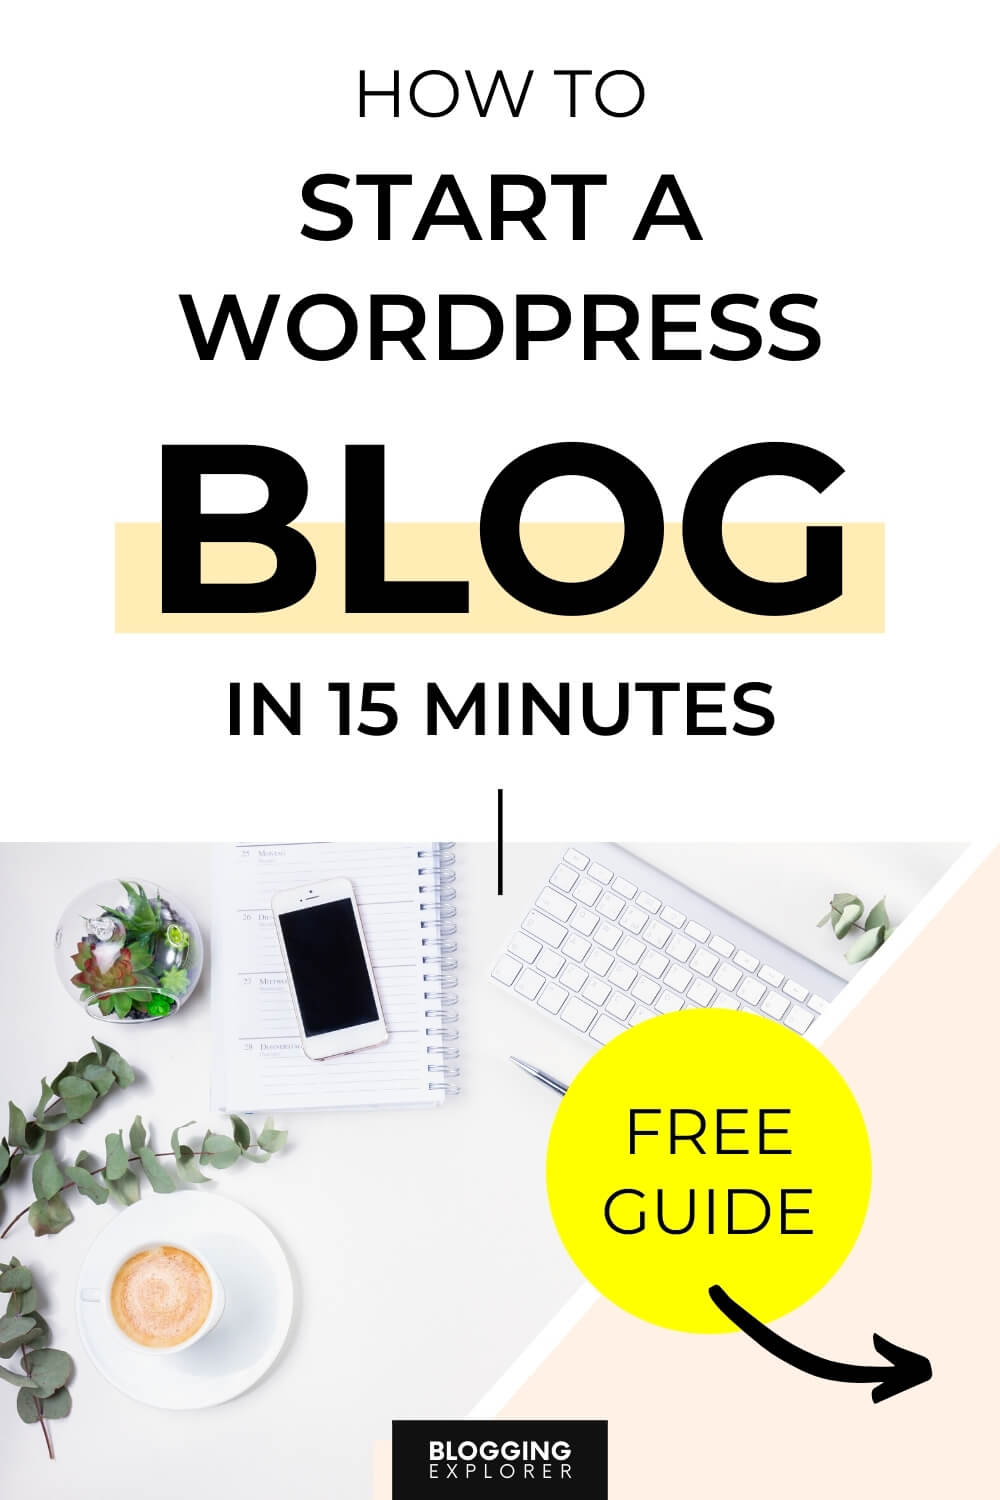 How to start a WordPress blog in 15 minutes - Free Guide for Beginners